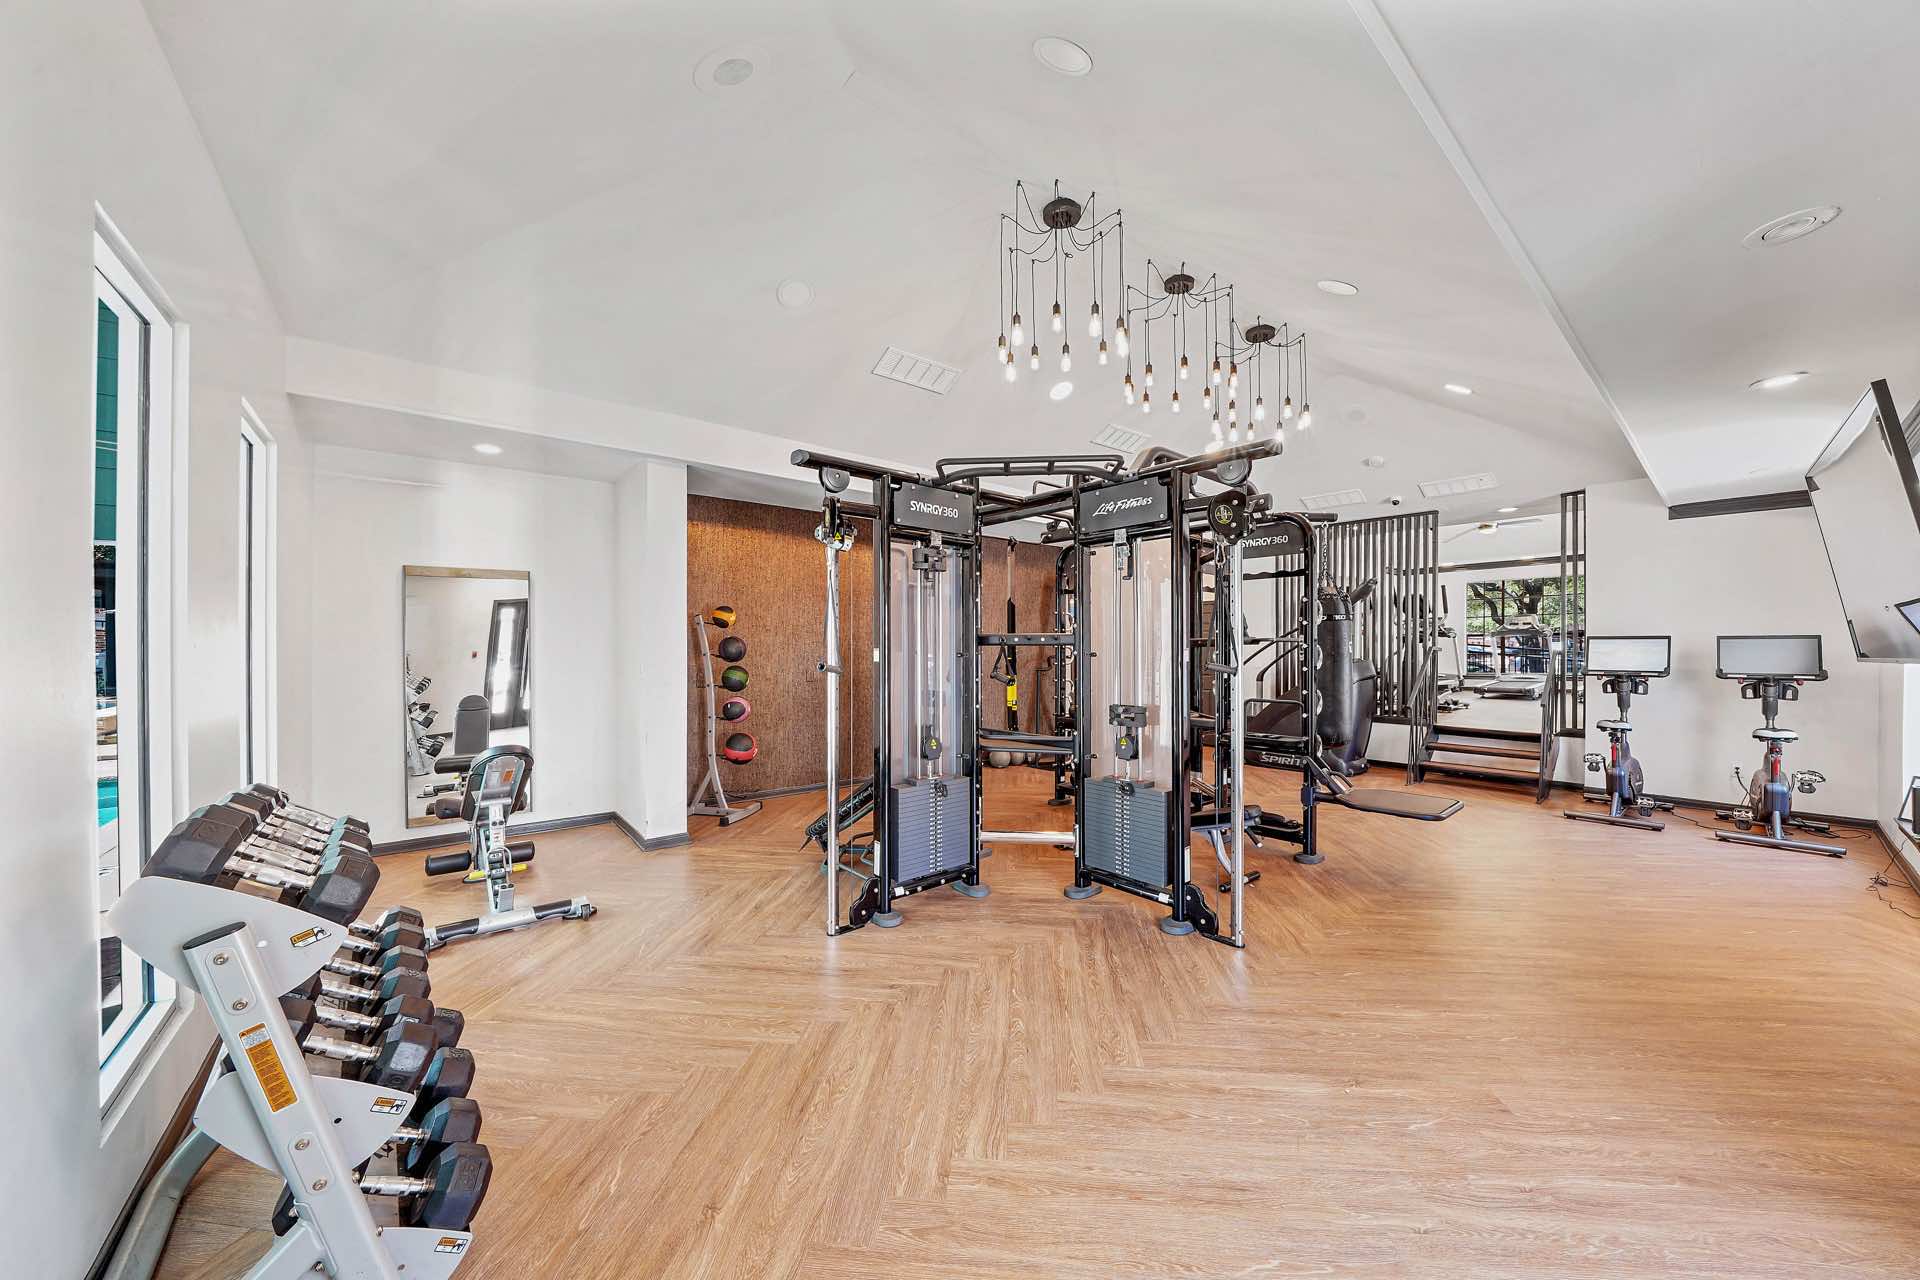 high ceiling and wood-style flooring in fitness center